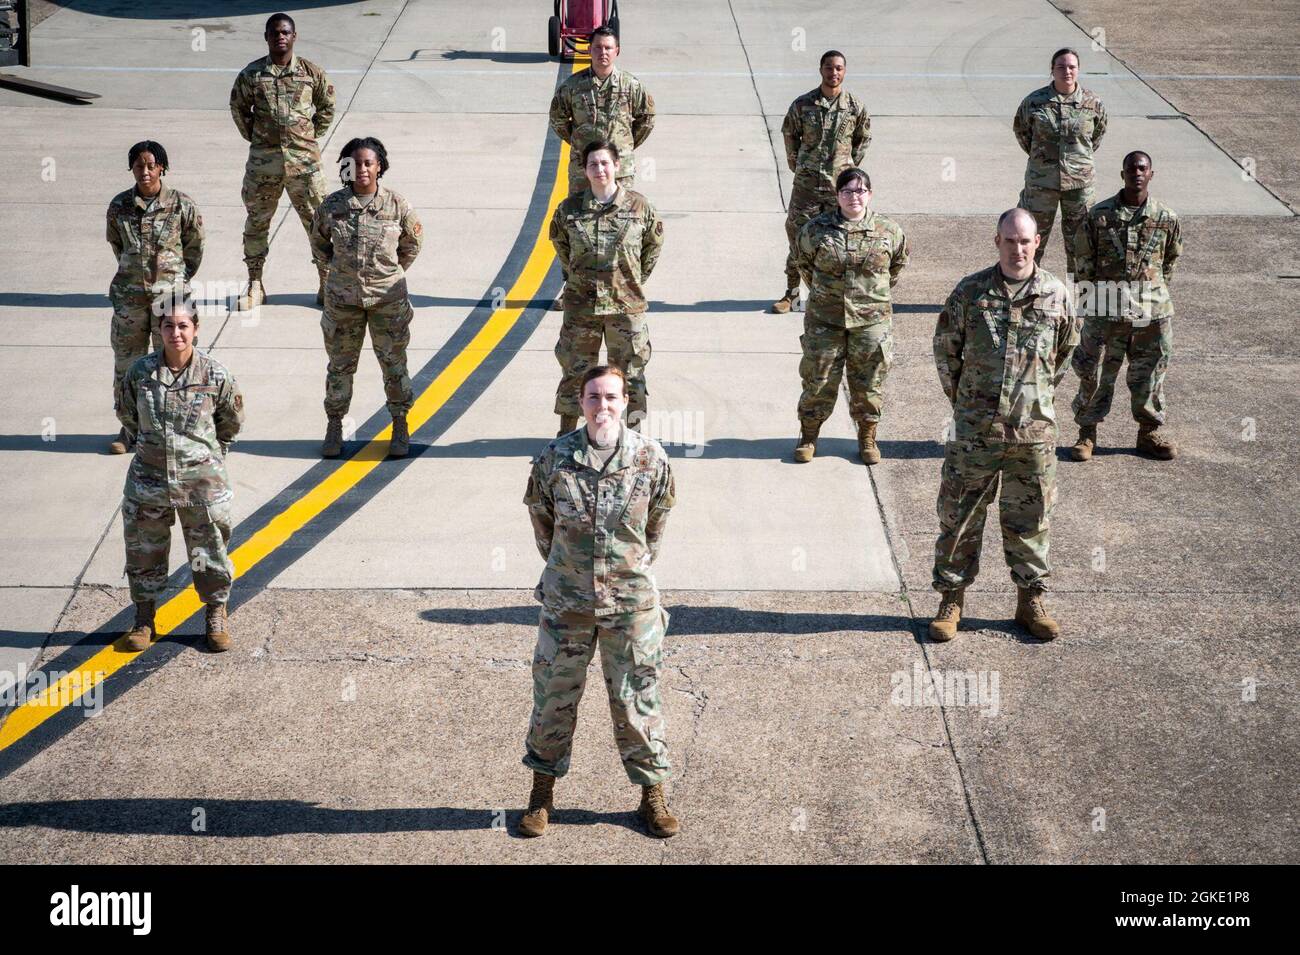 Members of the 2nd Logistics Readiness Squadron stand at the position of parade rest for a staff photo at Barksdale Air Force Base, Louisiana, March 25, 2021. The 2nd LRS provides supply and transportation support to various units on base. Stock Photo